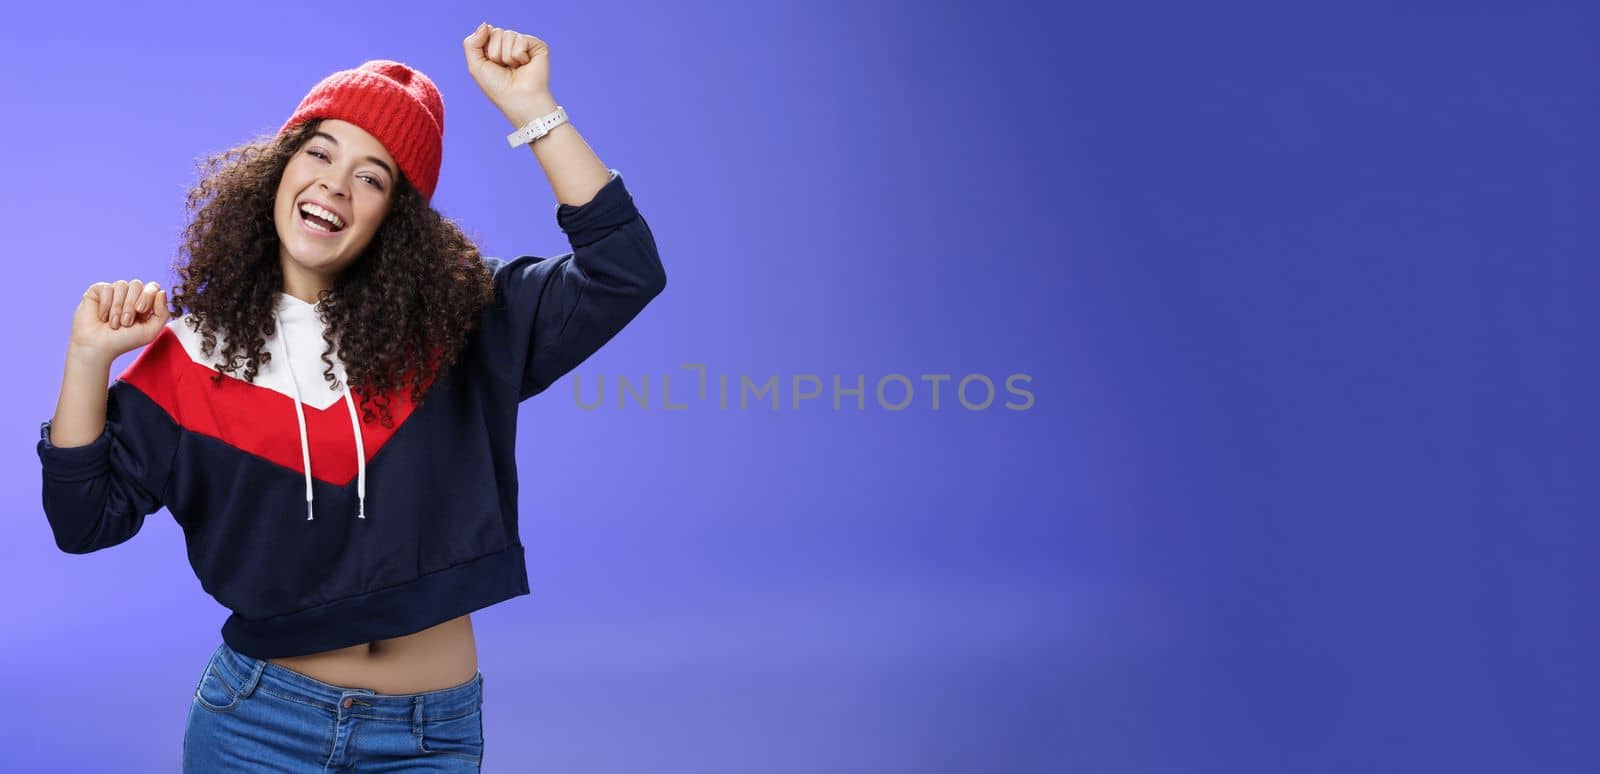 Hey come on dance with me. Friendly-looking bright and stylish cheerful woman with curly hairstyle wearing warm beanie raising hands up as enjoying great day, having fun outdoors over blue wall.